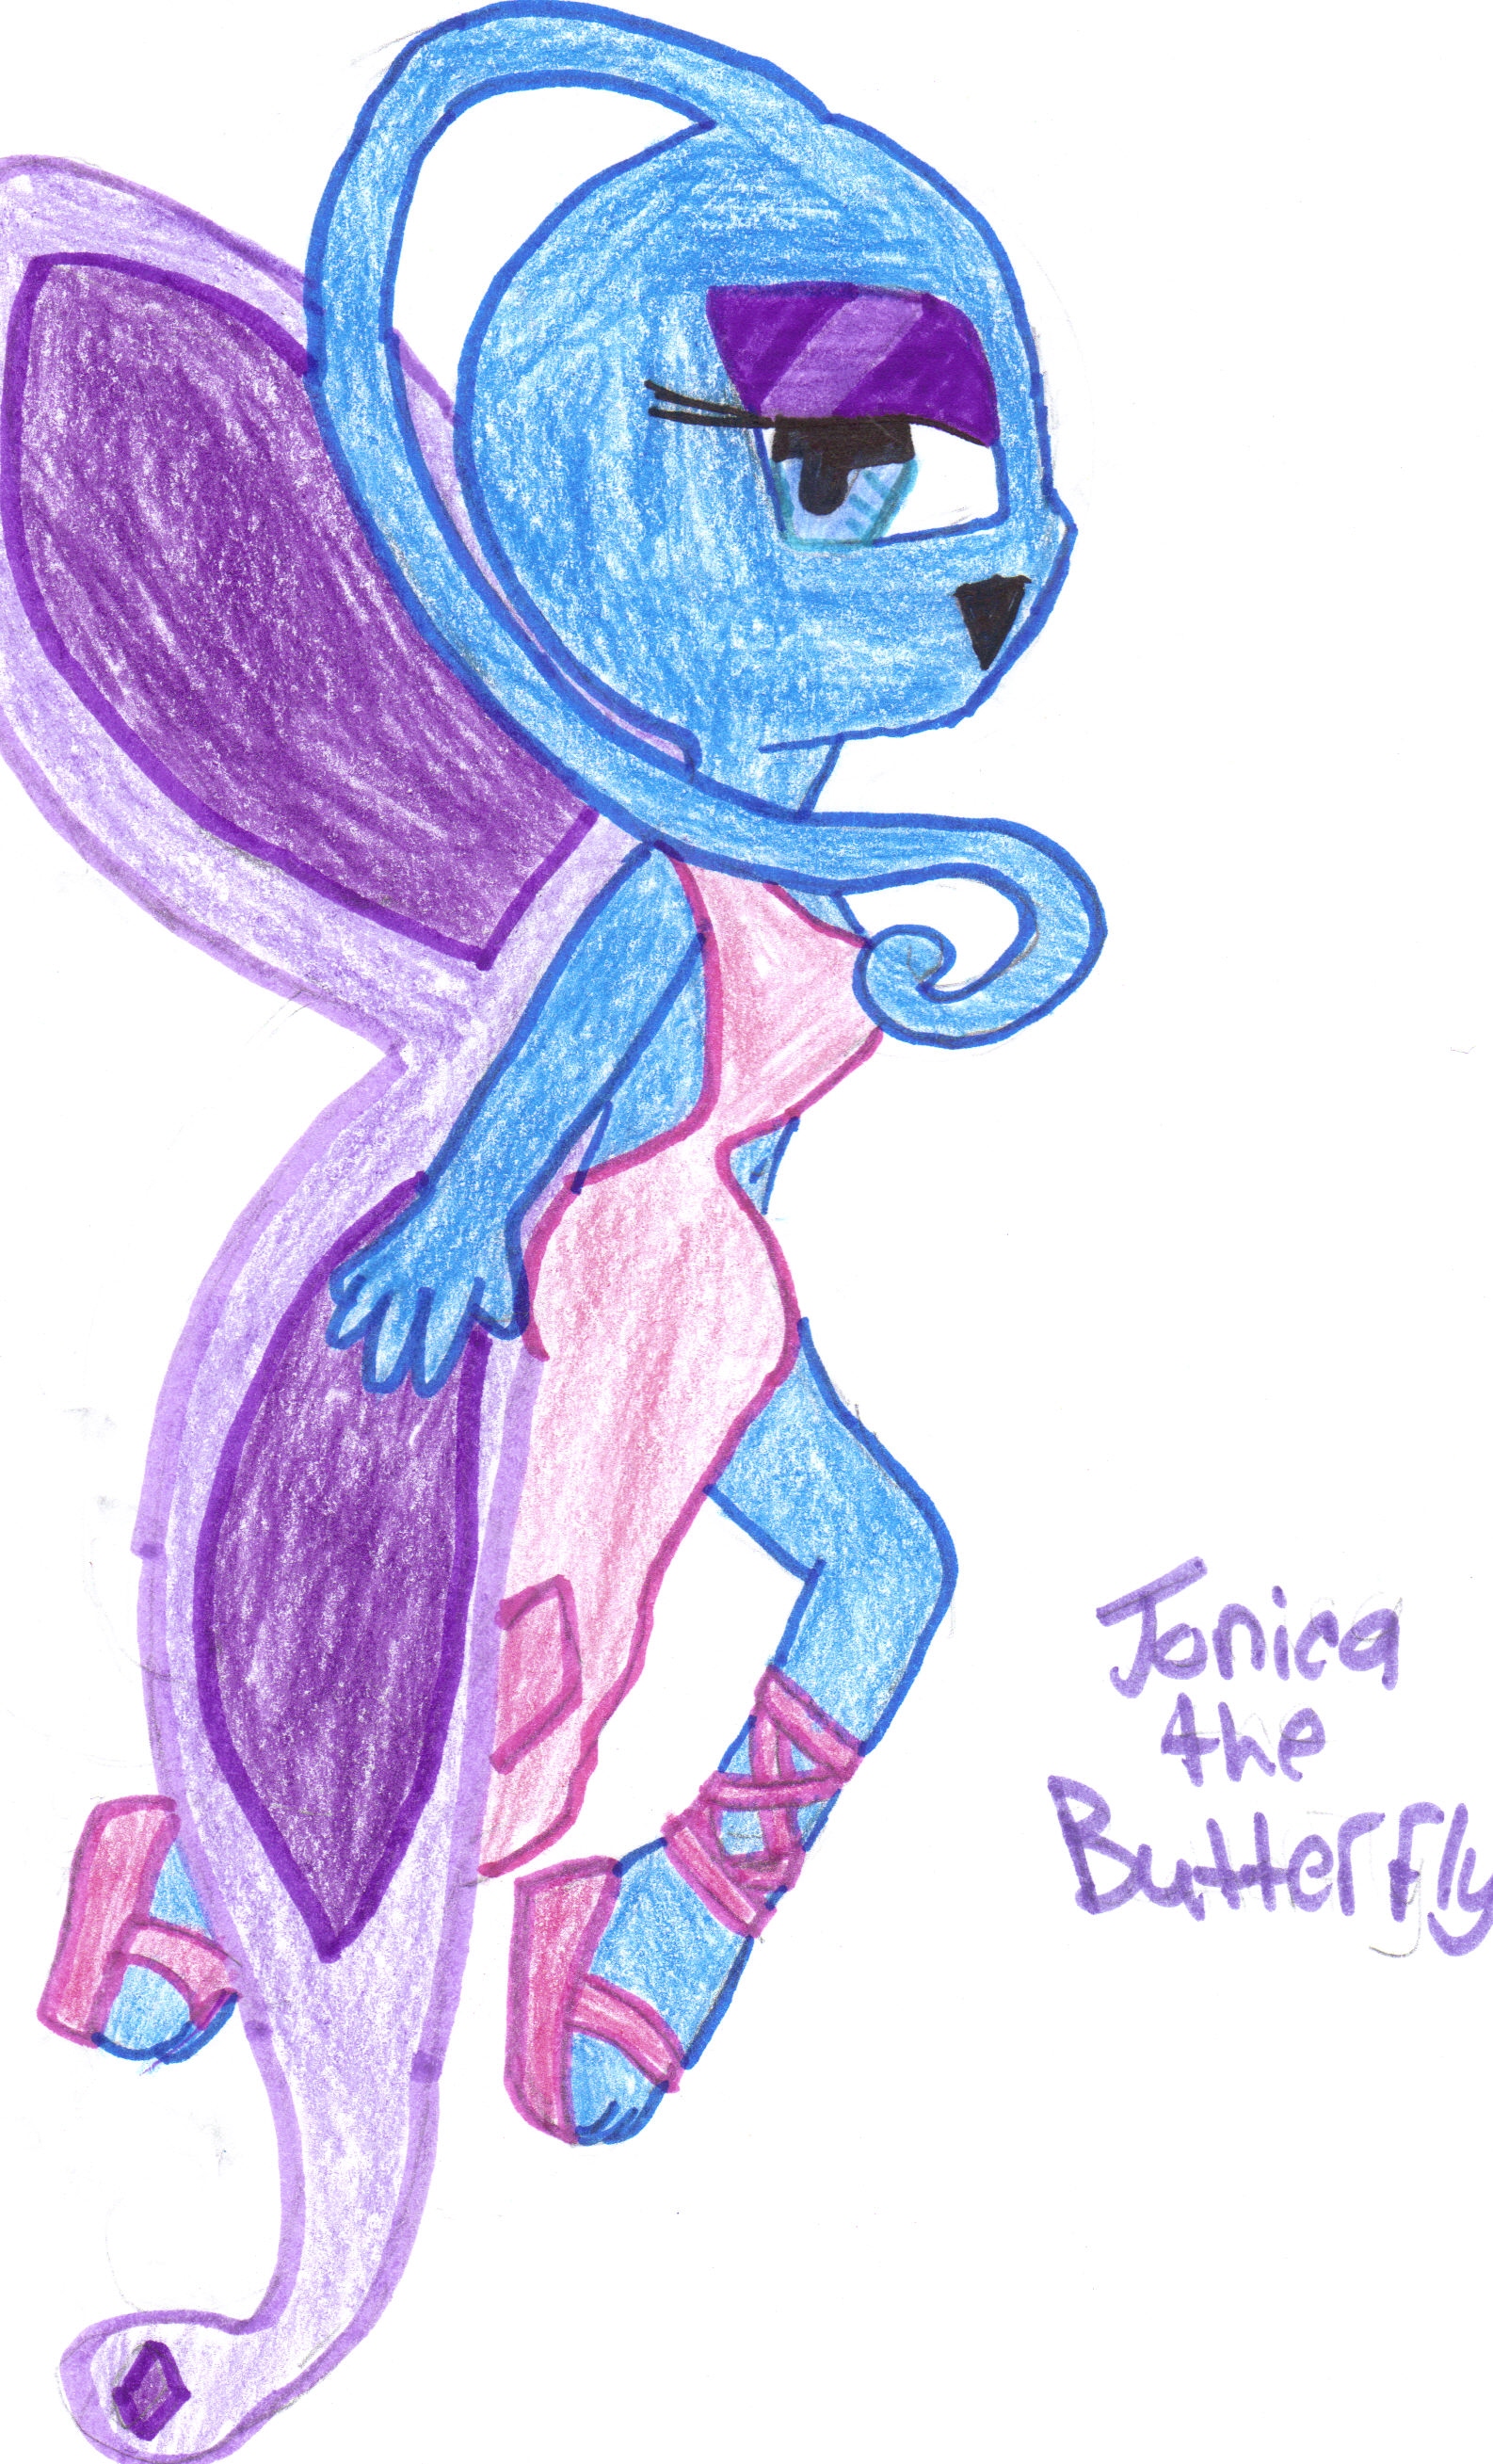 Jonica the Butterfly by KisaShika